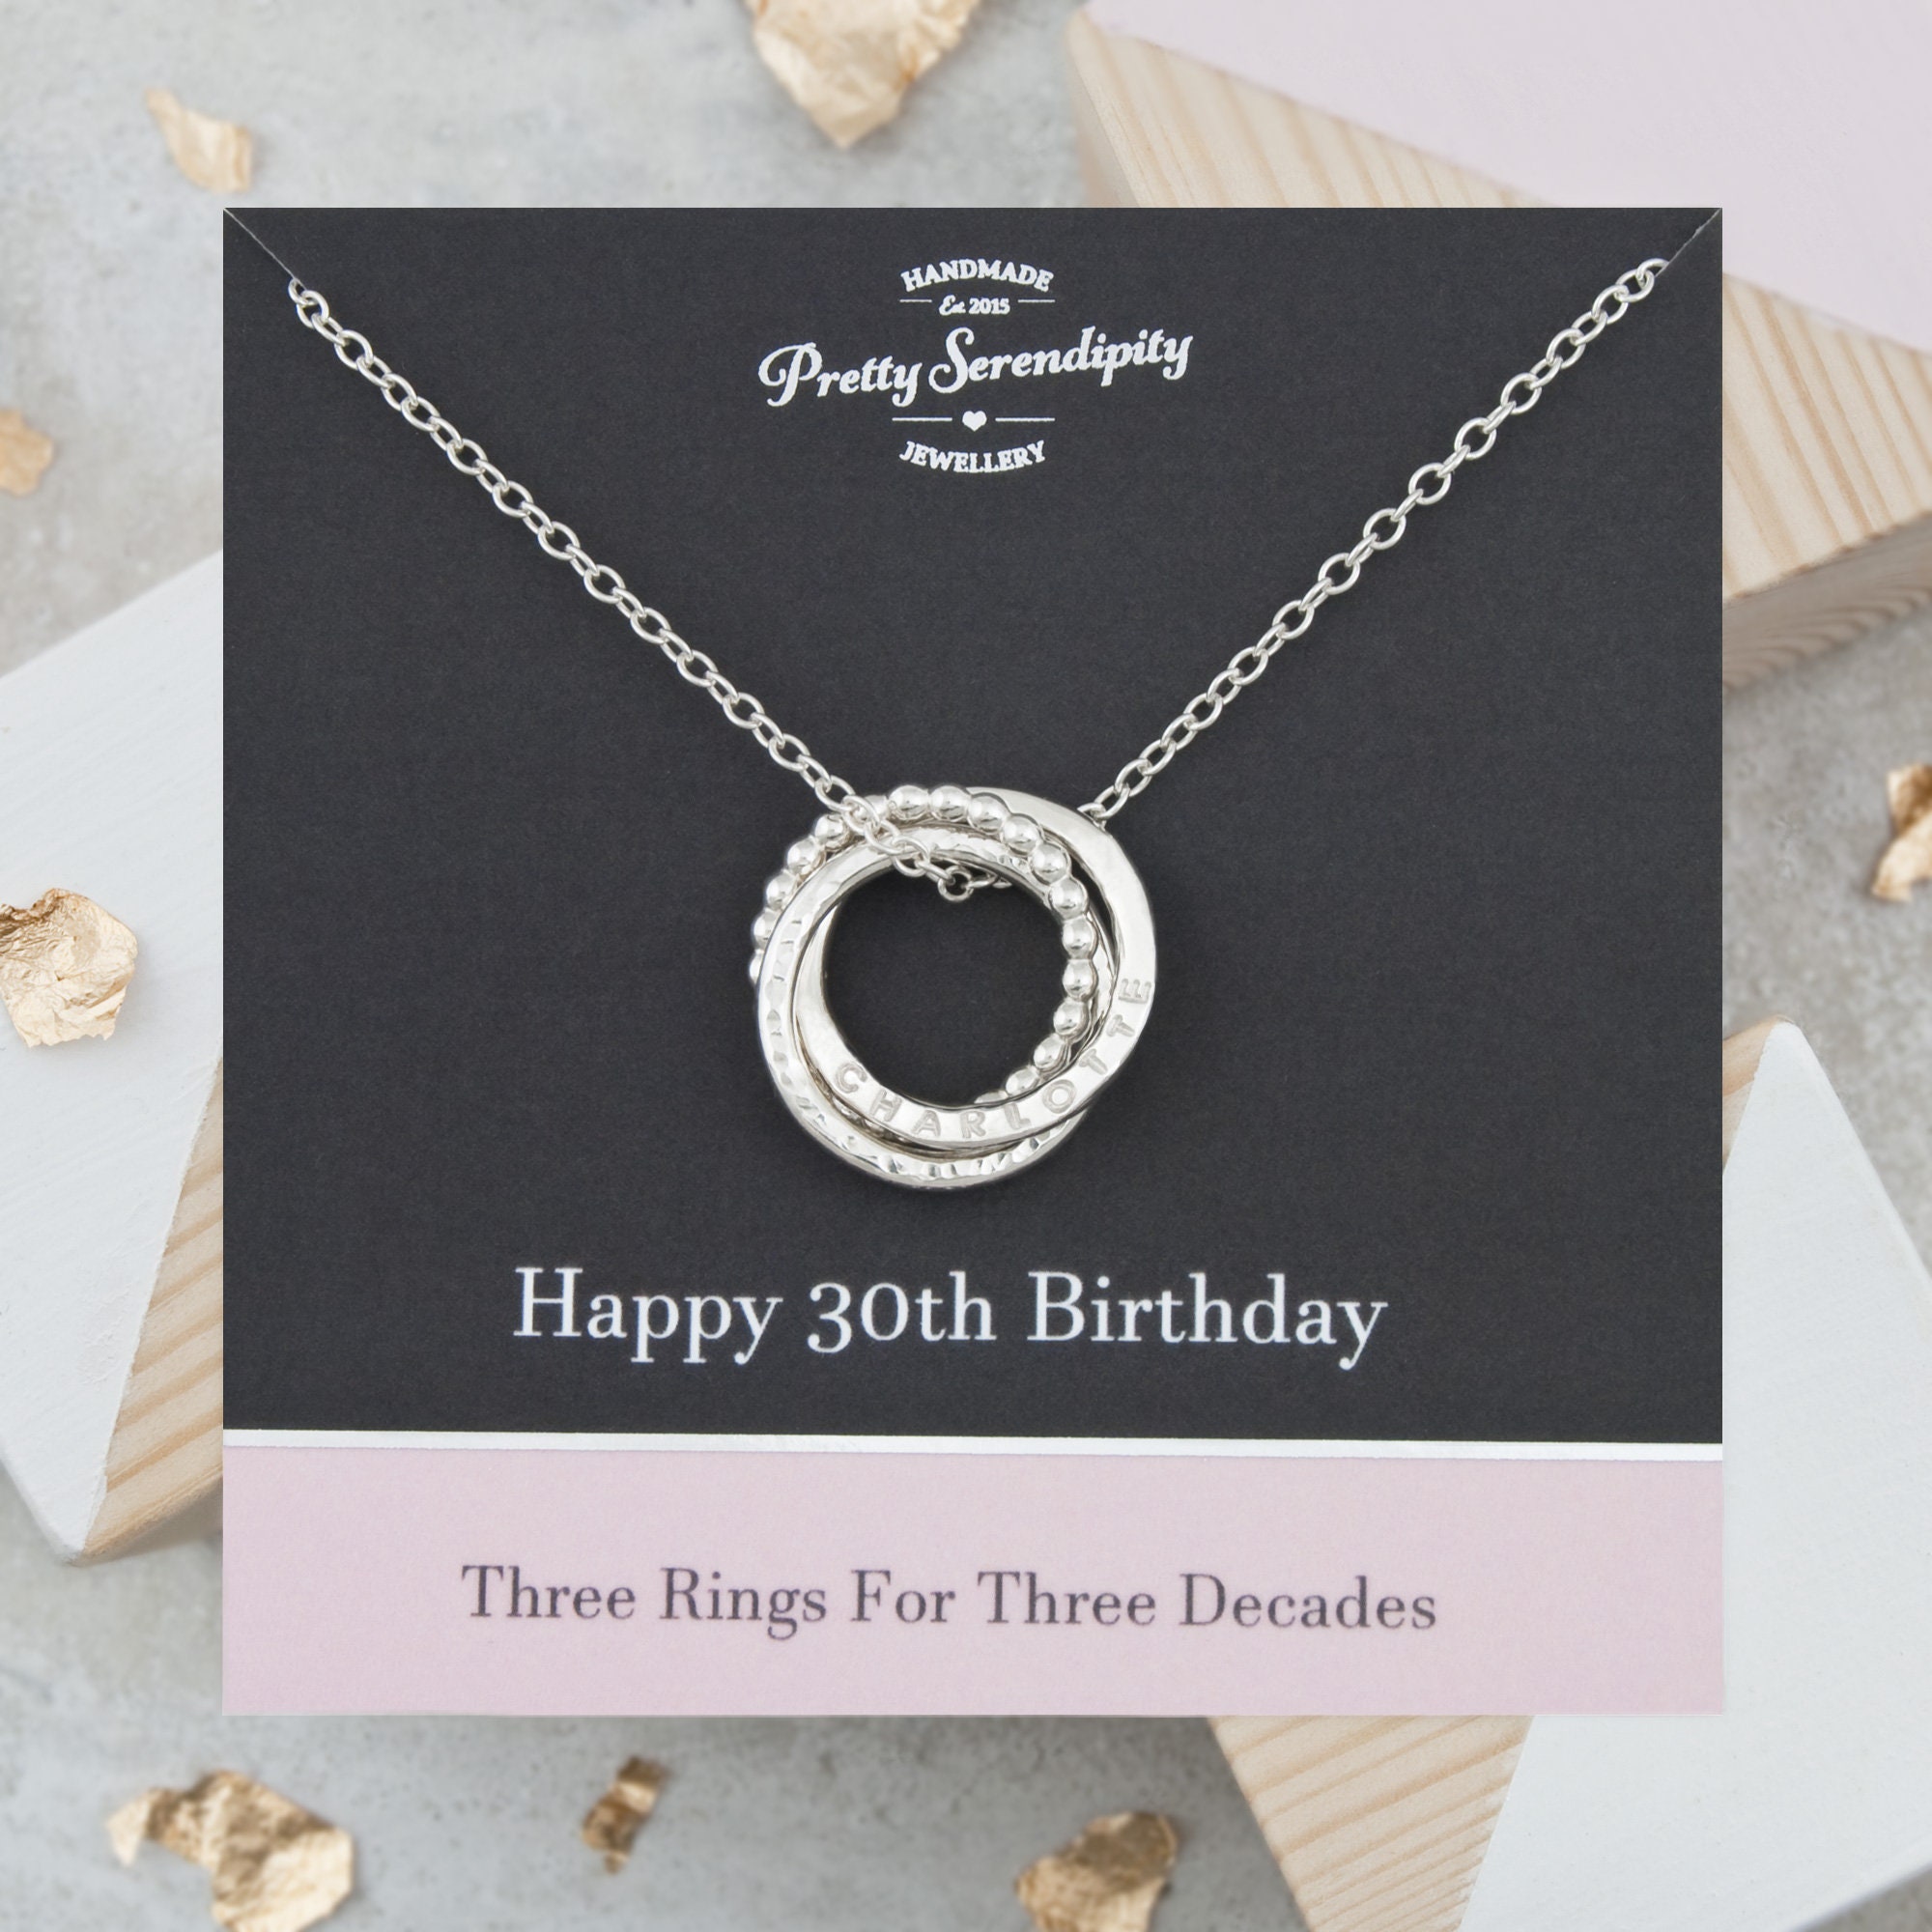 30Th Birthday Necklace - Personalised With Girl’s Name, Gift For Daughter, 3 Rings Decades